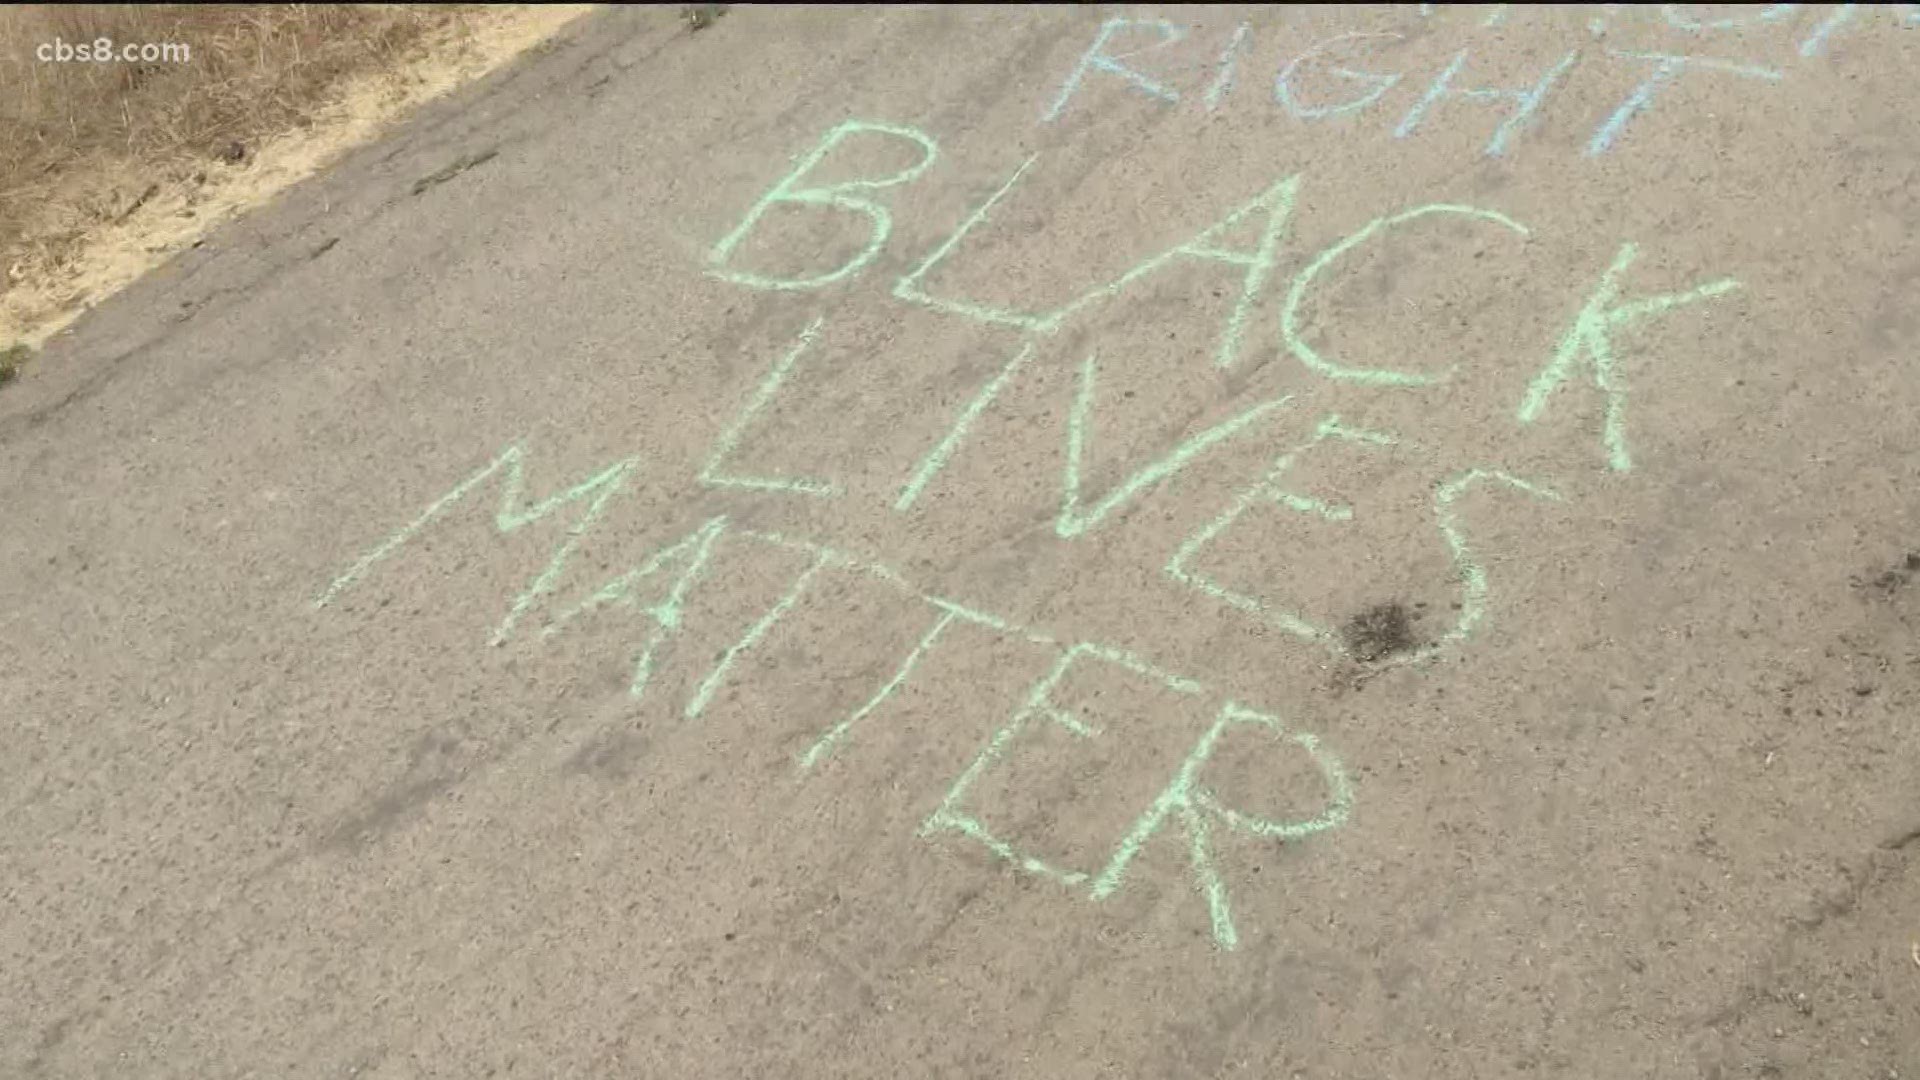 Chalk art was drawn by children and parents during public events to support Black Lives Matter.